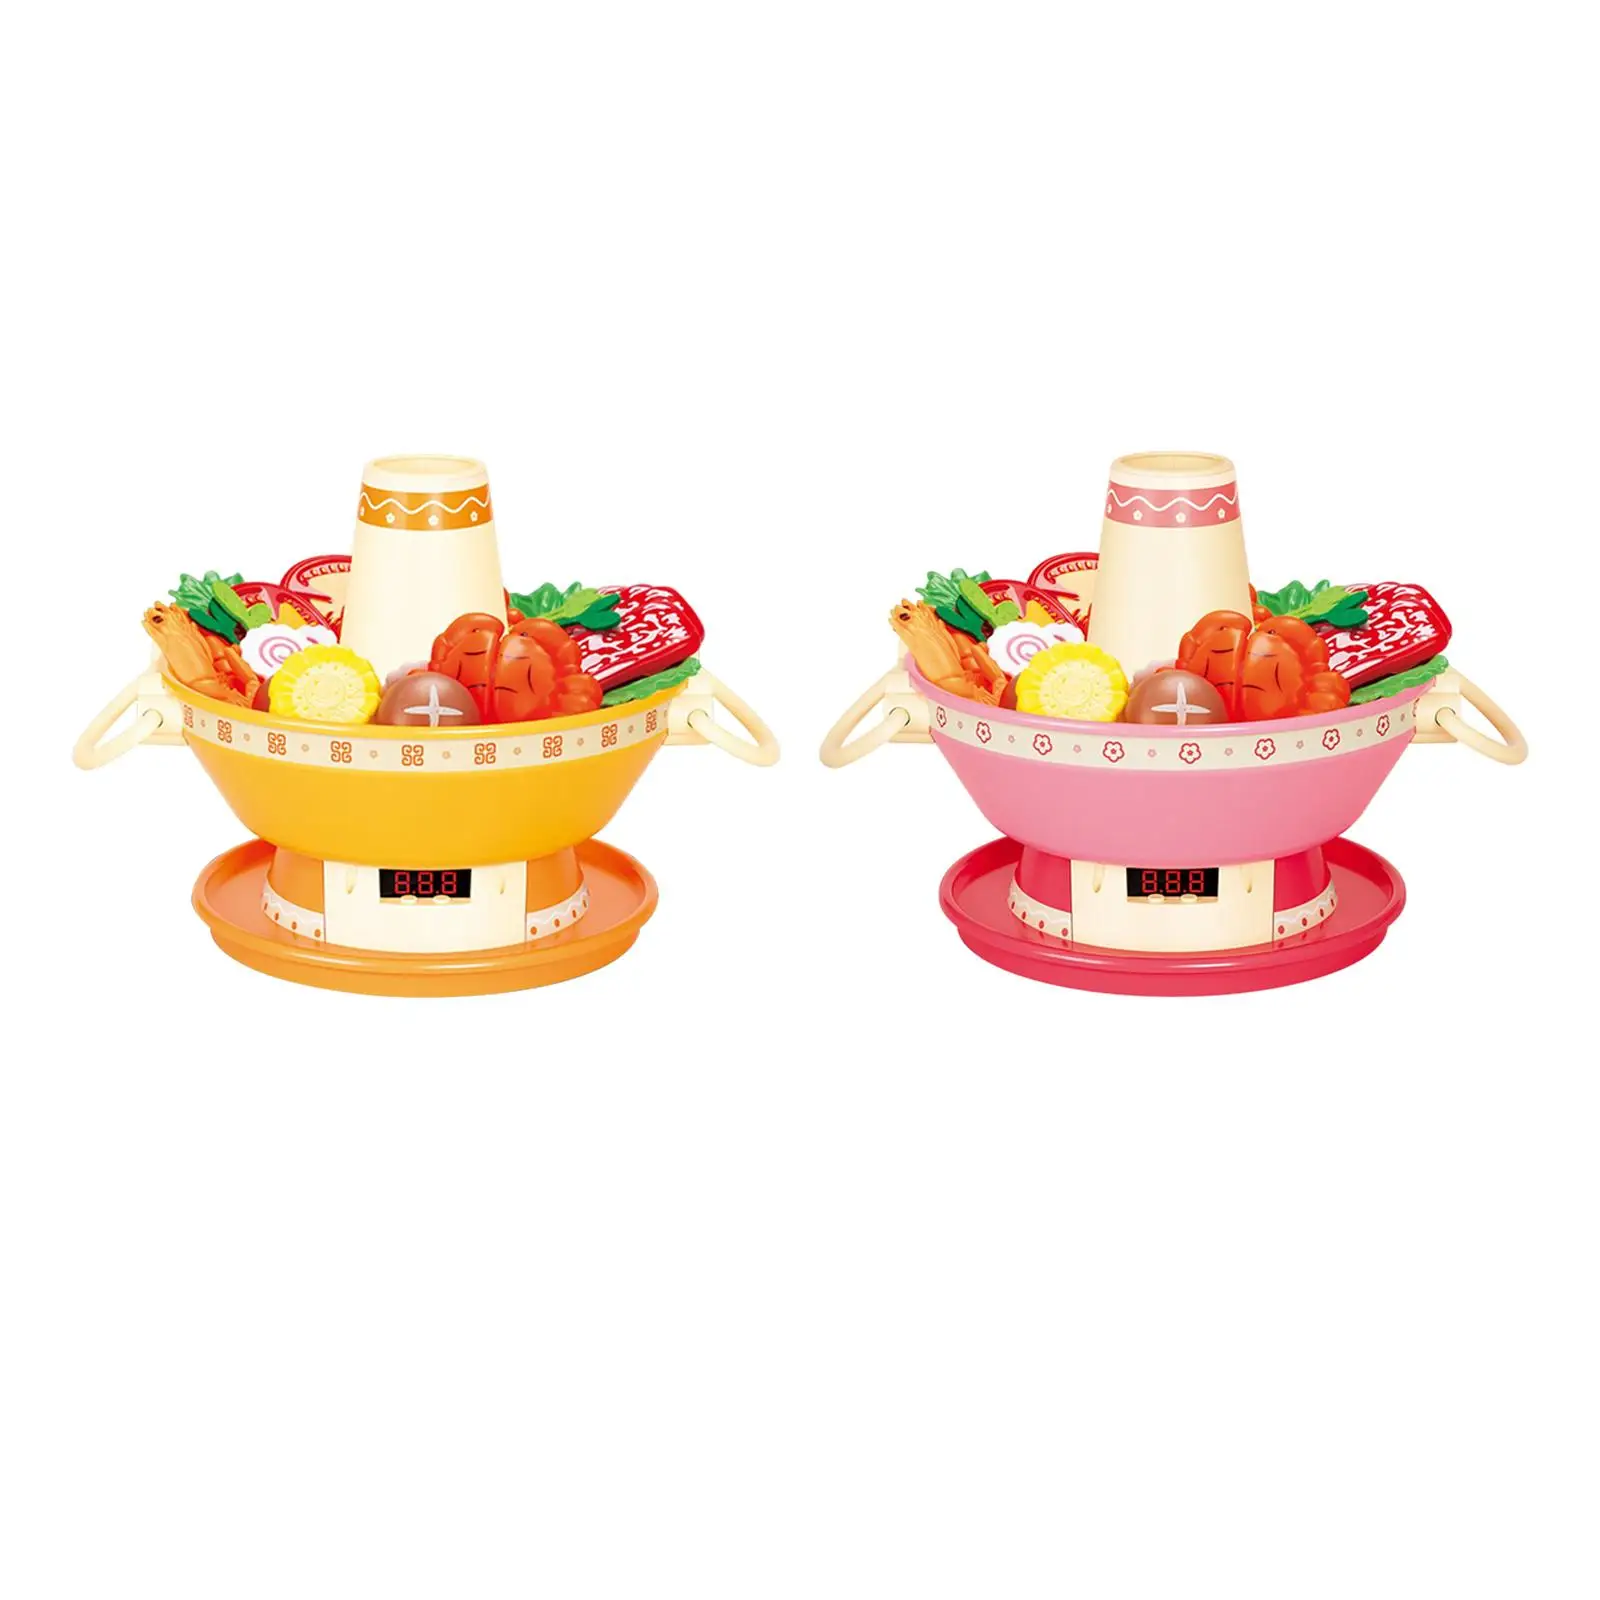 Kitchen Playset Learning Skill Toy with Food Accessories Hot Pot Pretend Play Kitchen Playset Toy for Unisex Children Gifts